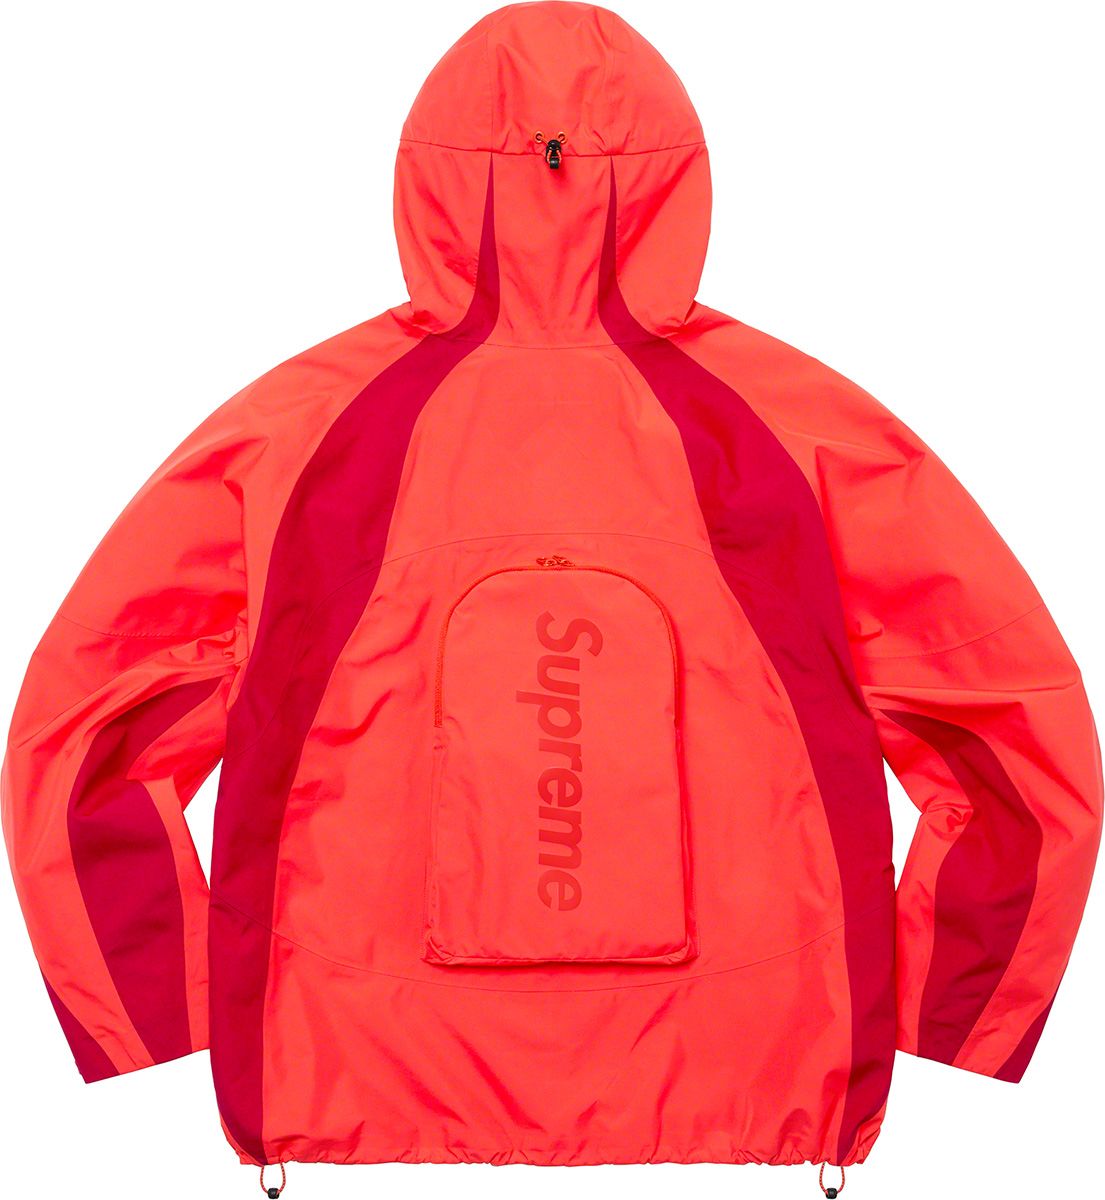 GORE-TEX PACLITE® Jacket - Spring/Summer 2022 Preview – Supreme